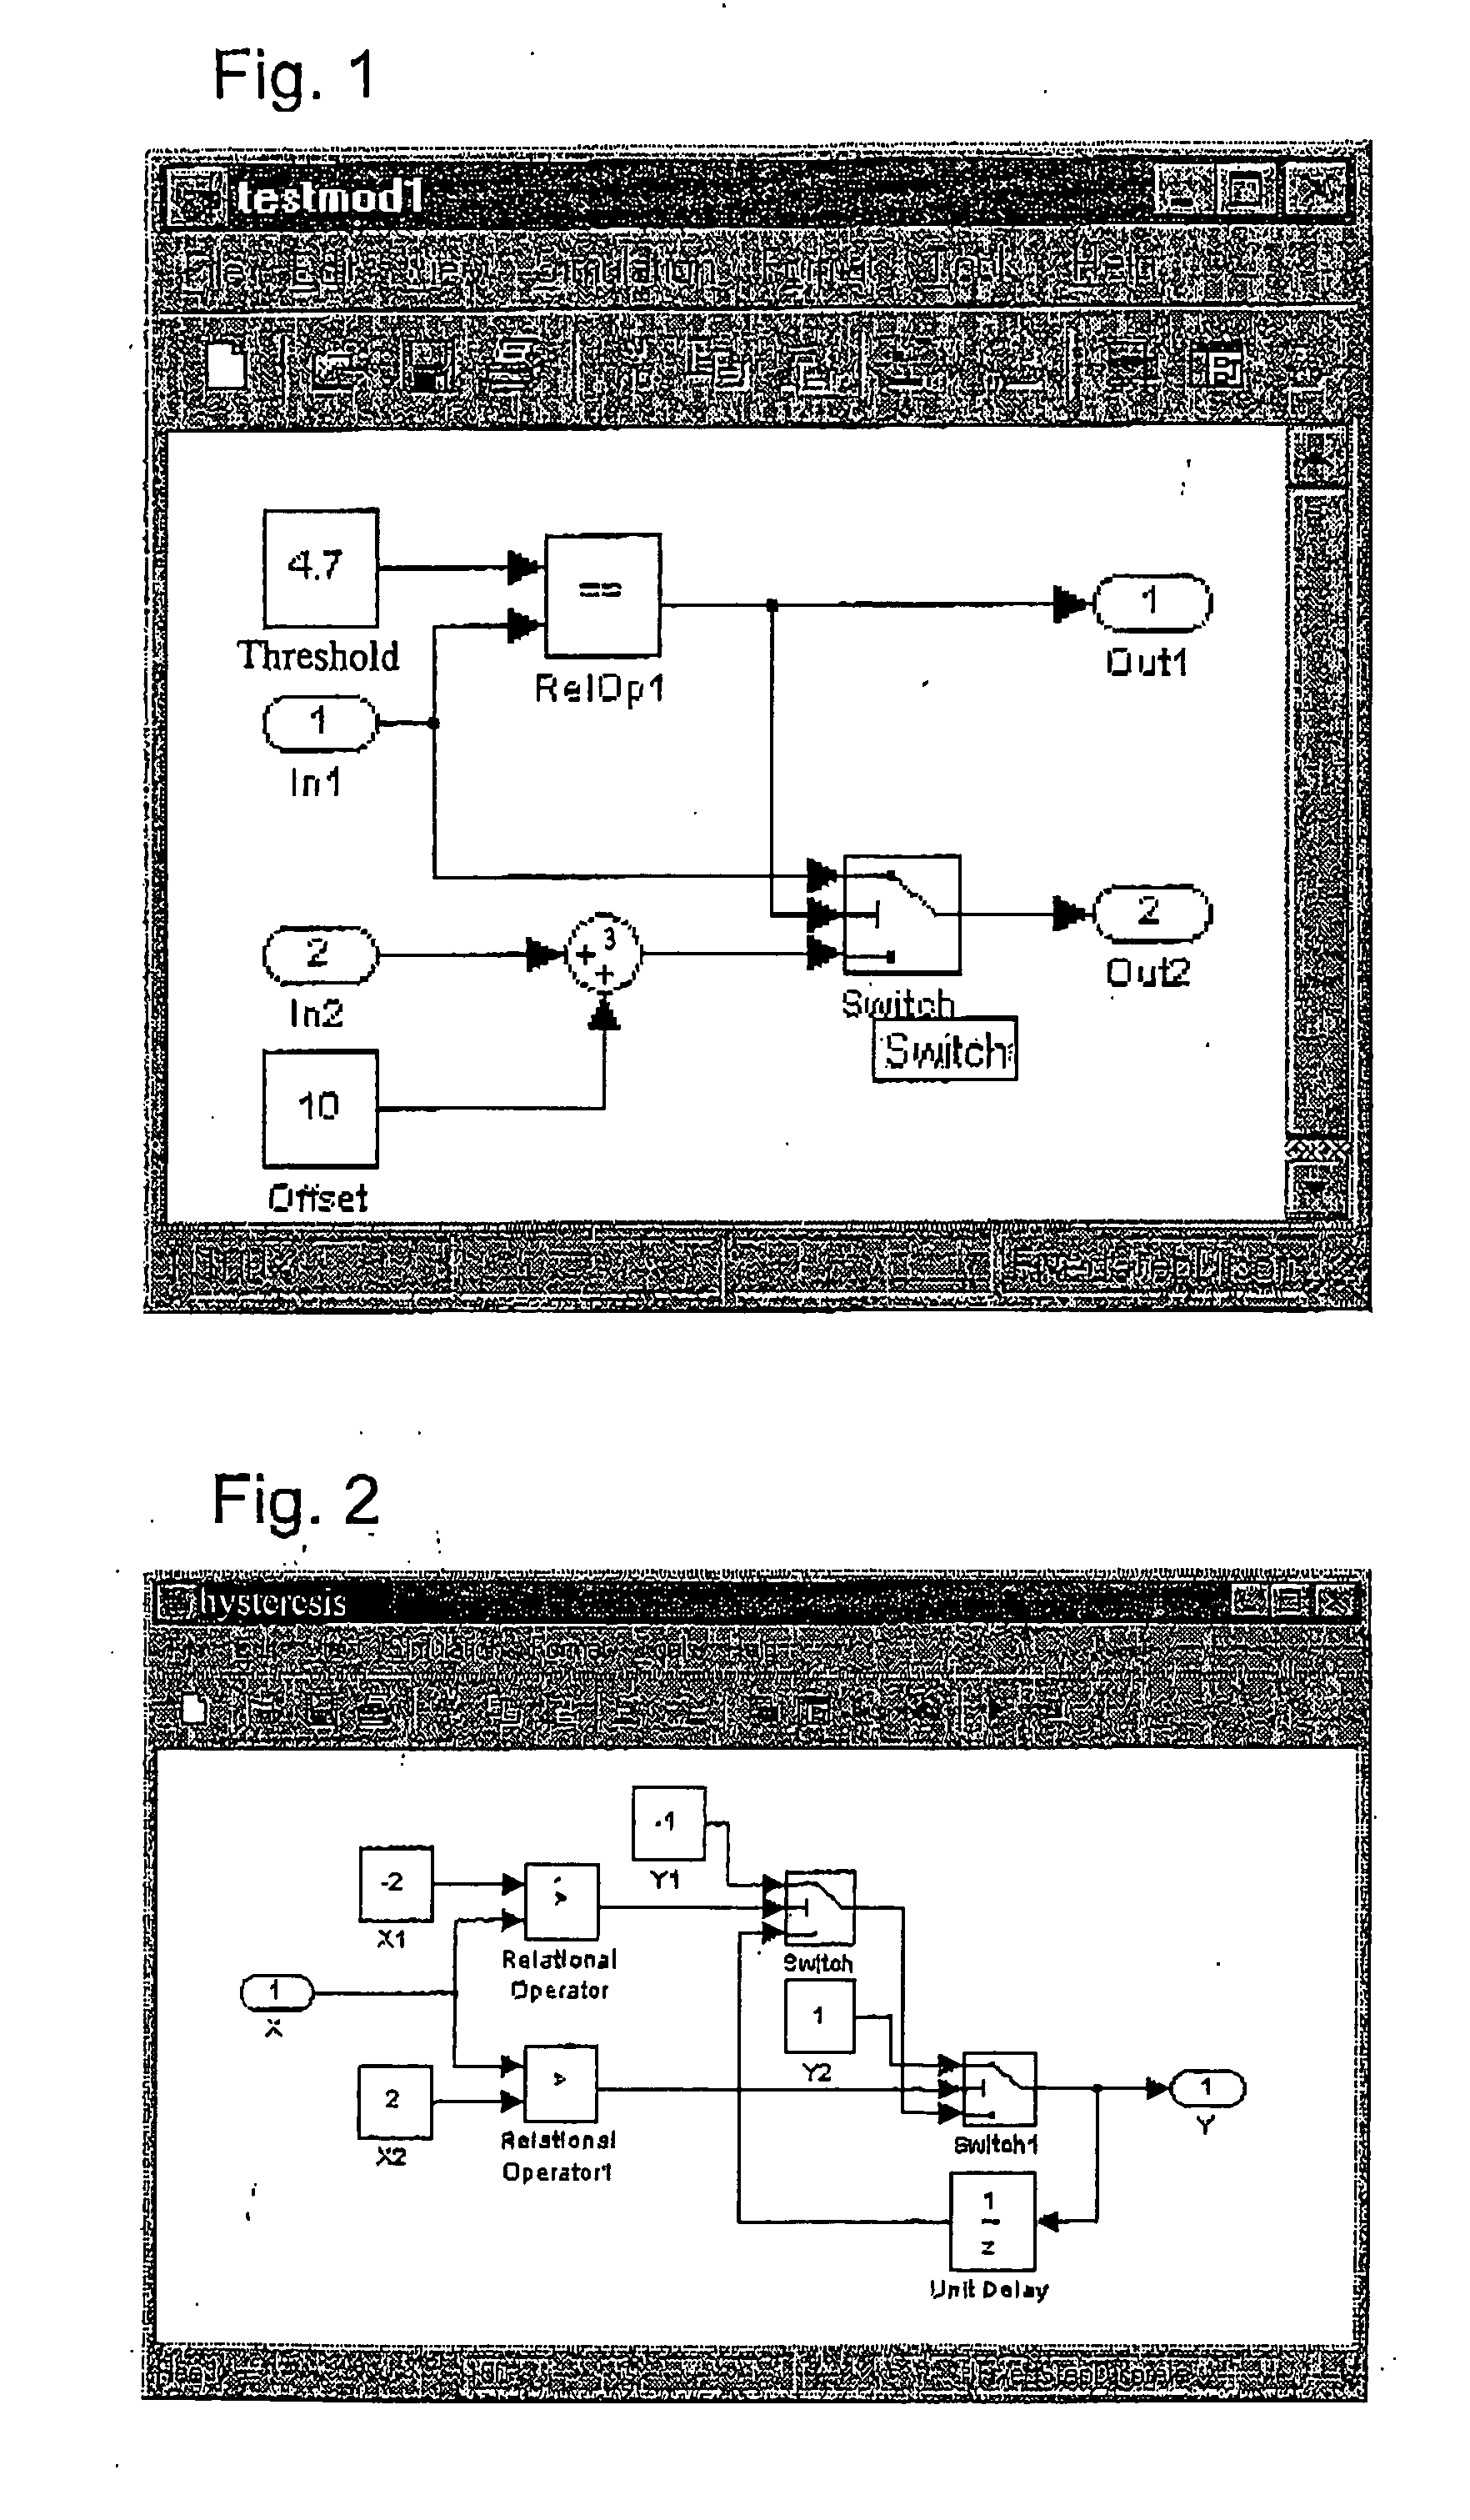 Method for the creation of sequences for testing software